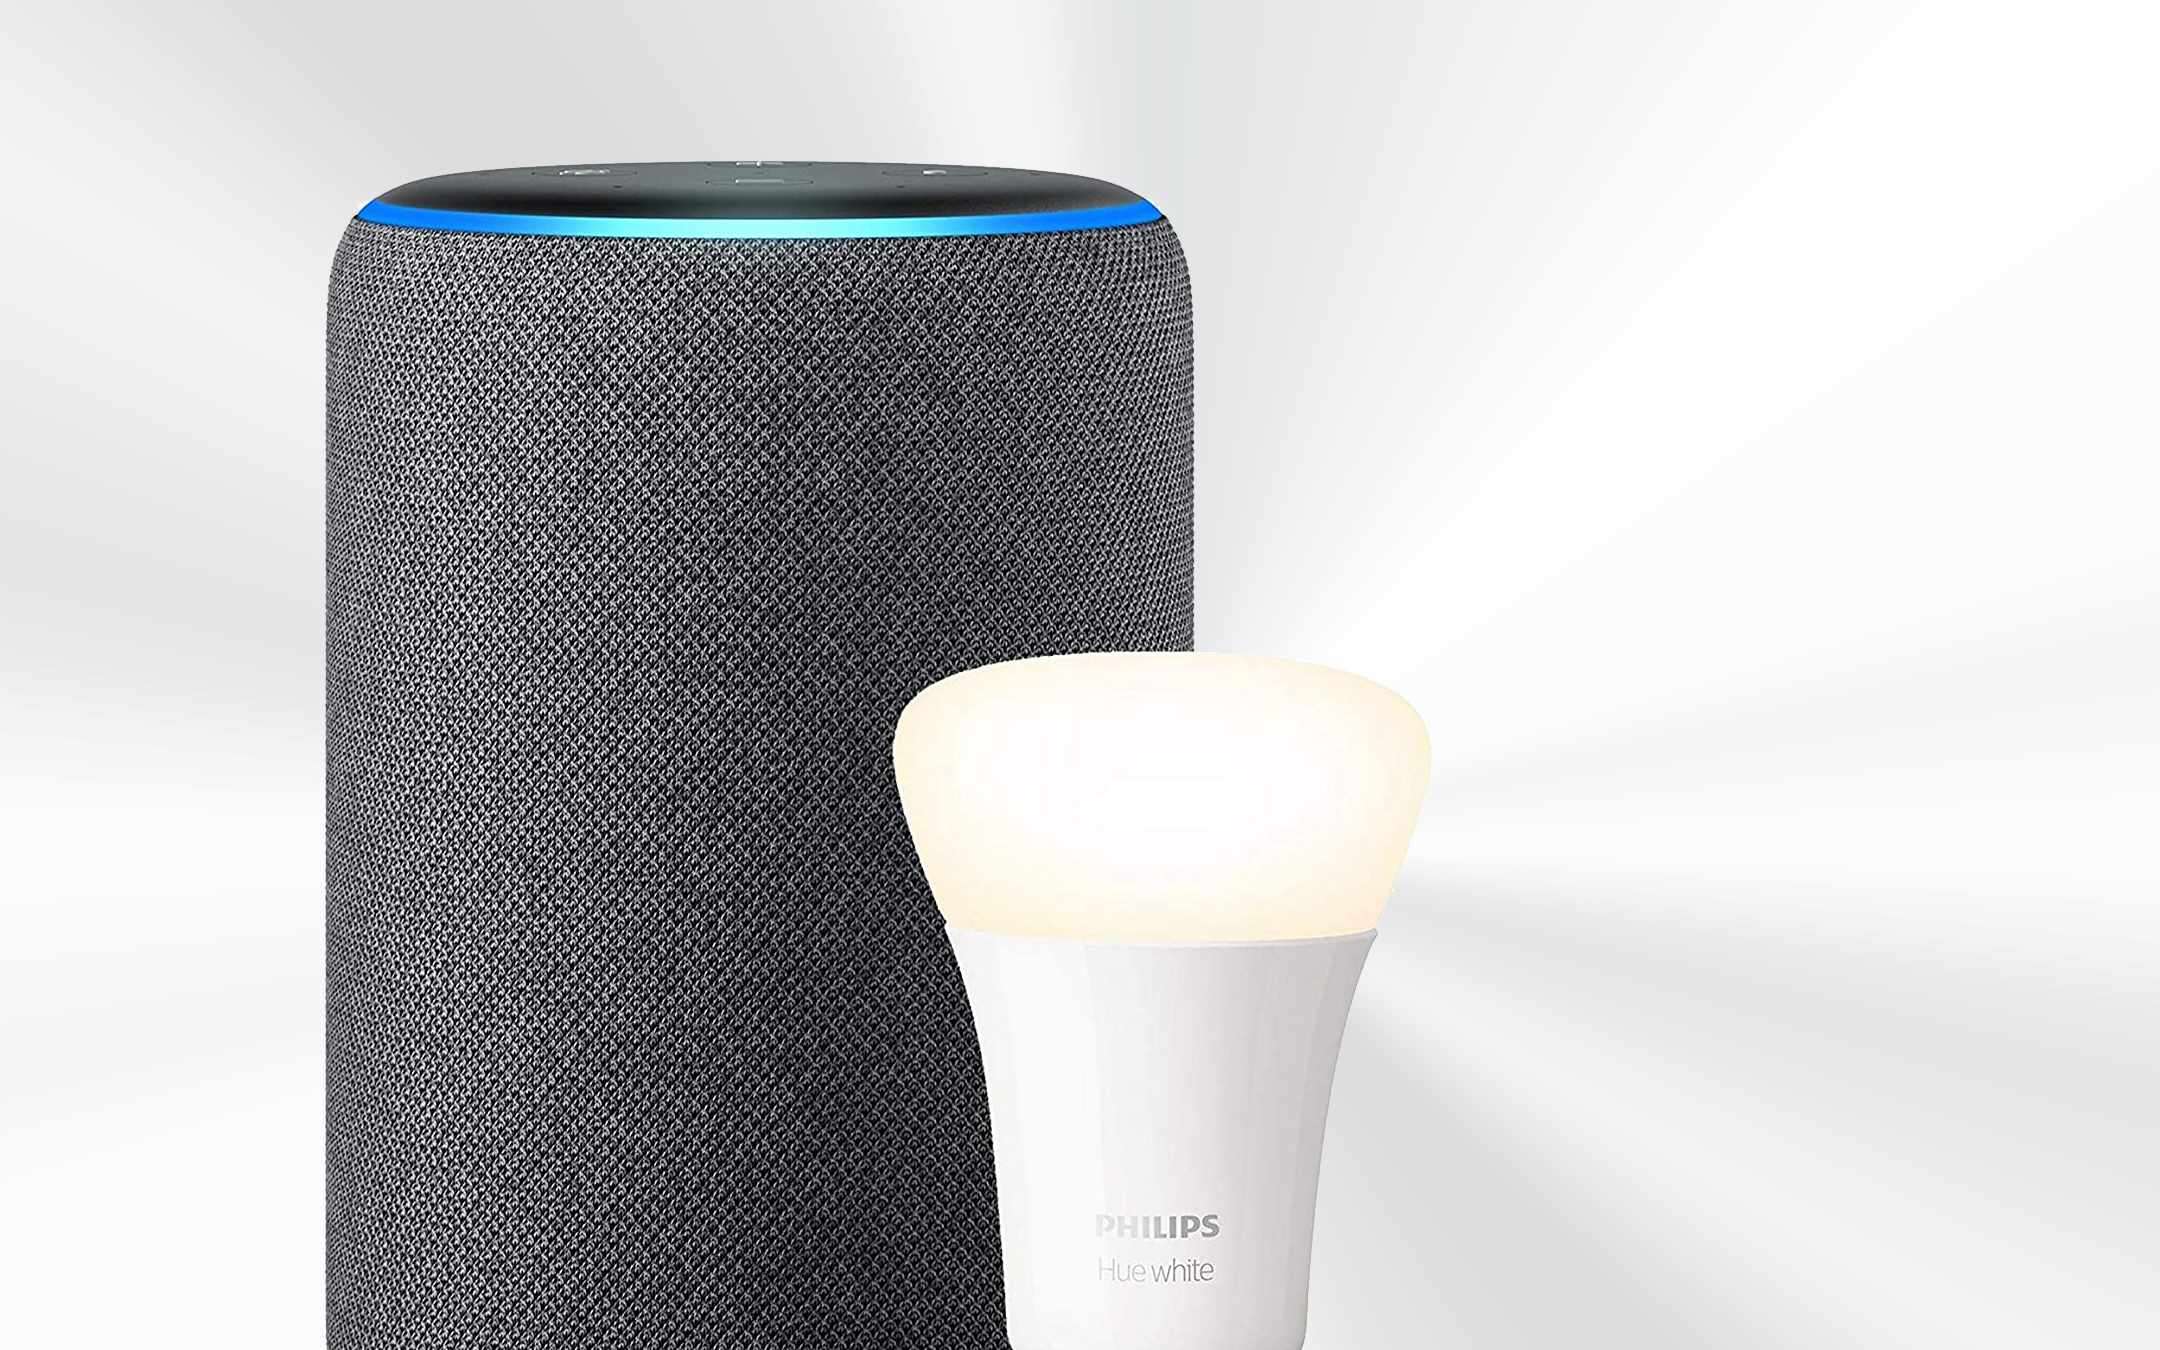 Amazon Echo Plus and Philips Hue: and light was